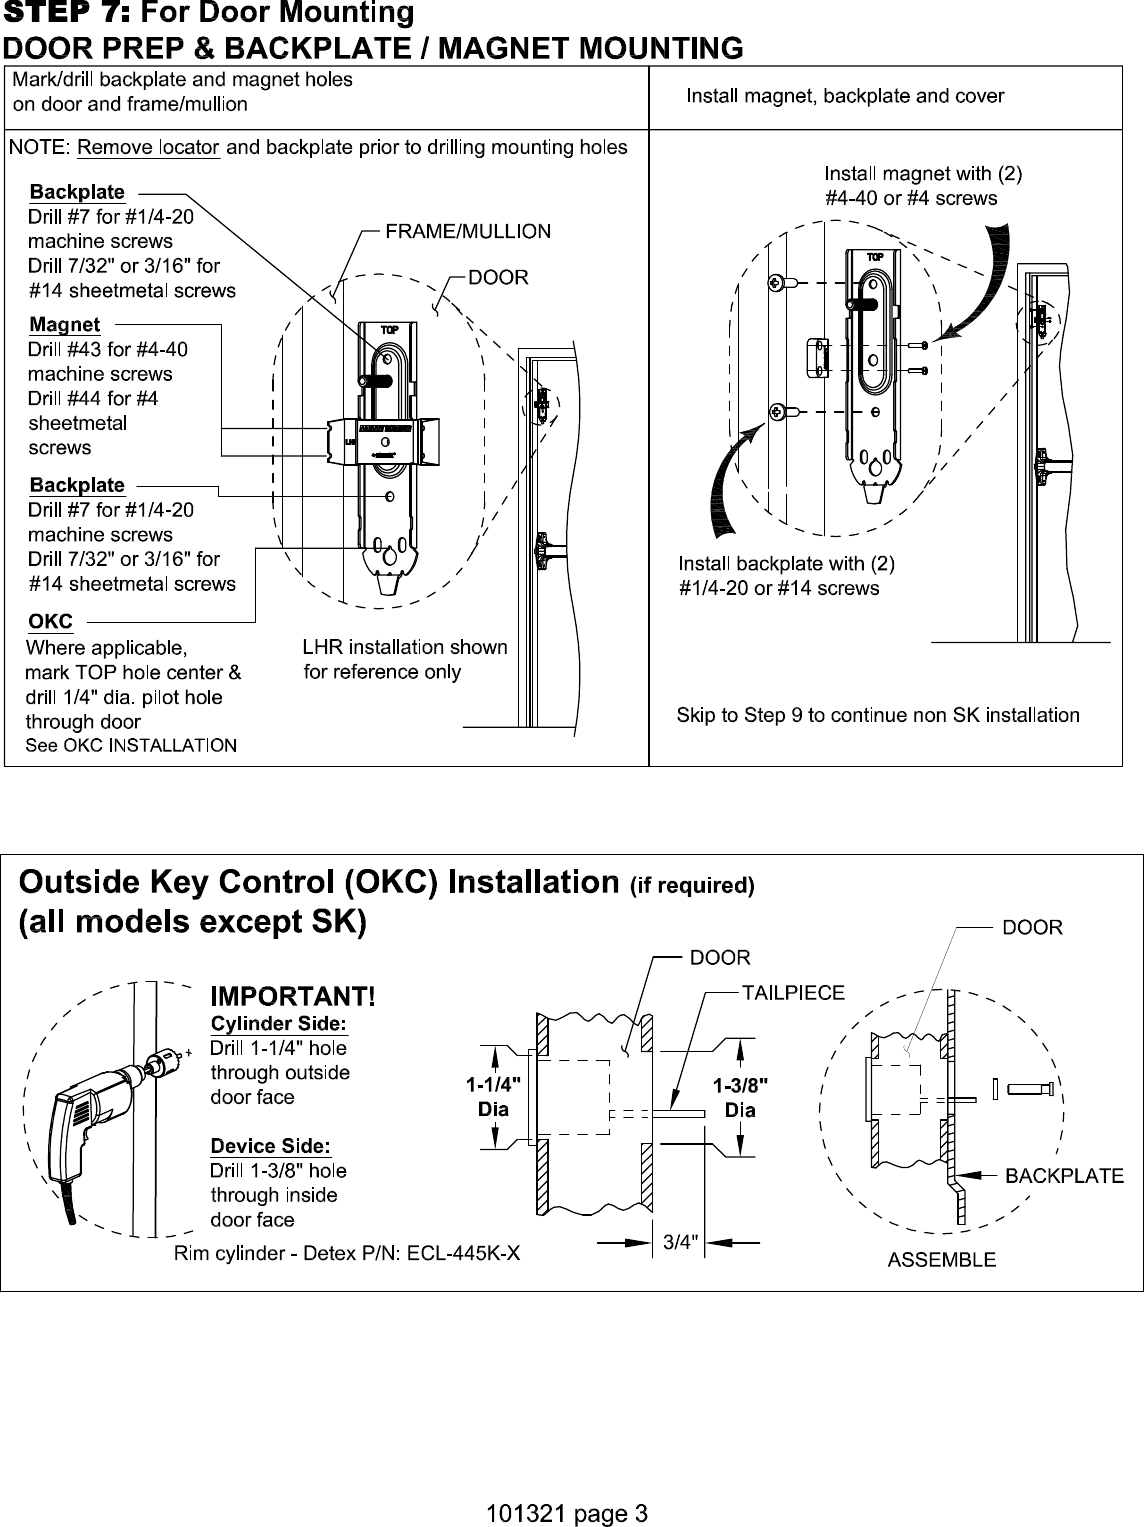 Page 3 of 7 - Detex  EAX-500 Installation Instructions 101321Press Quality